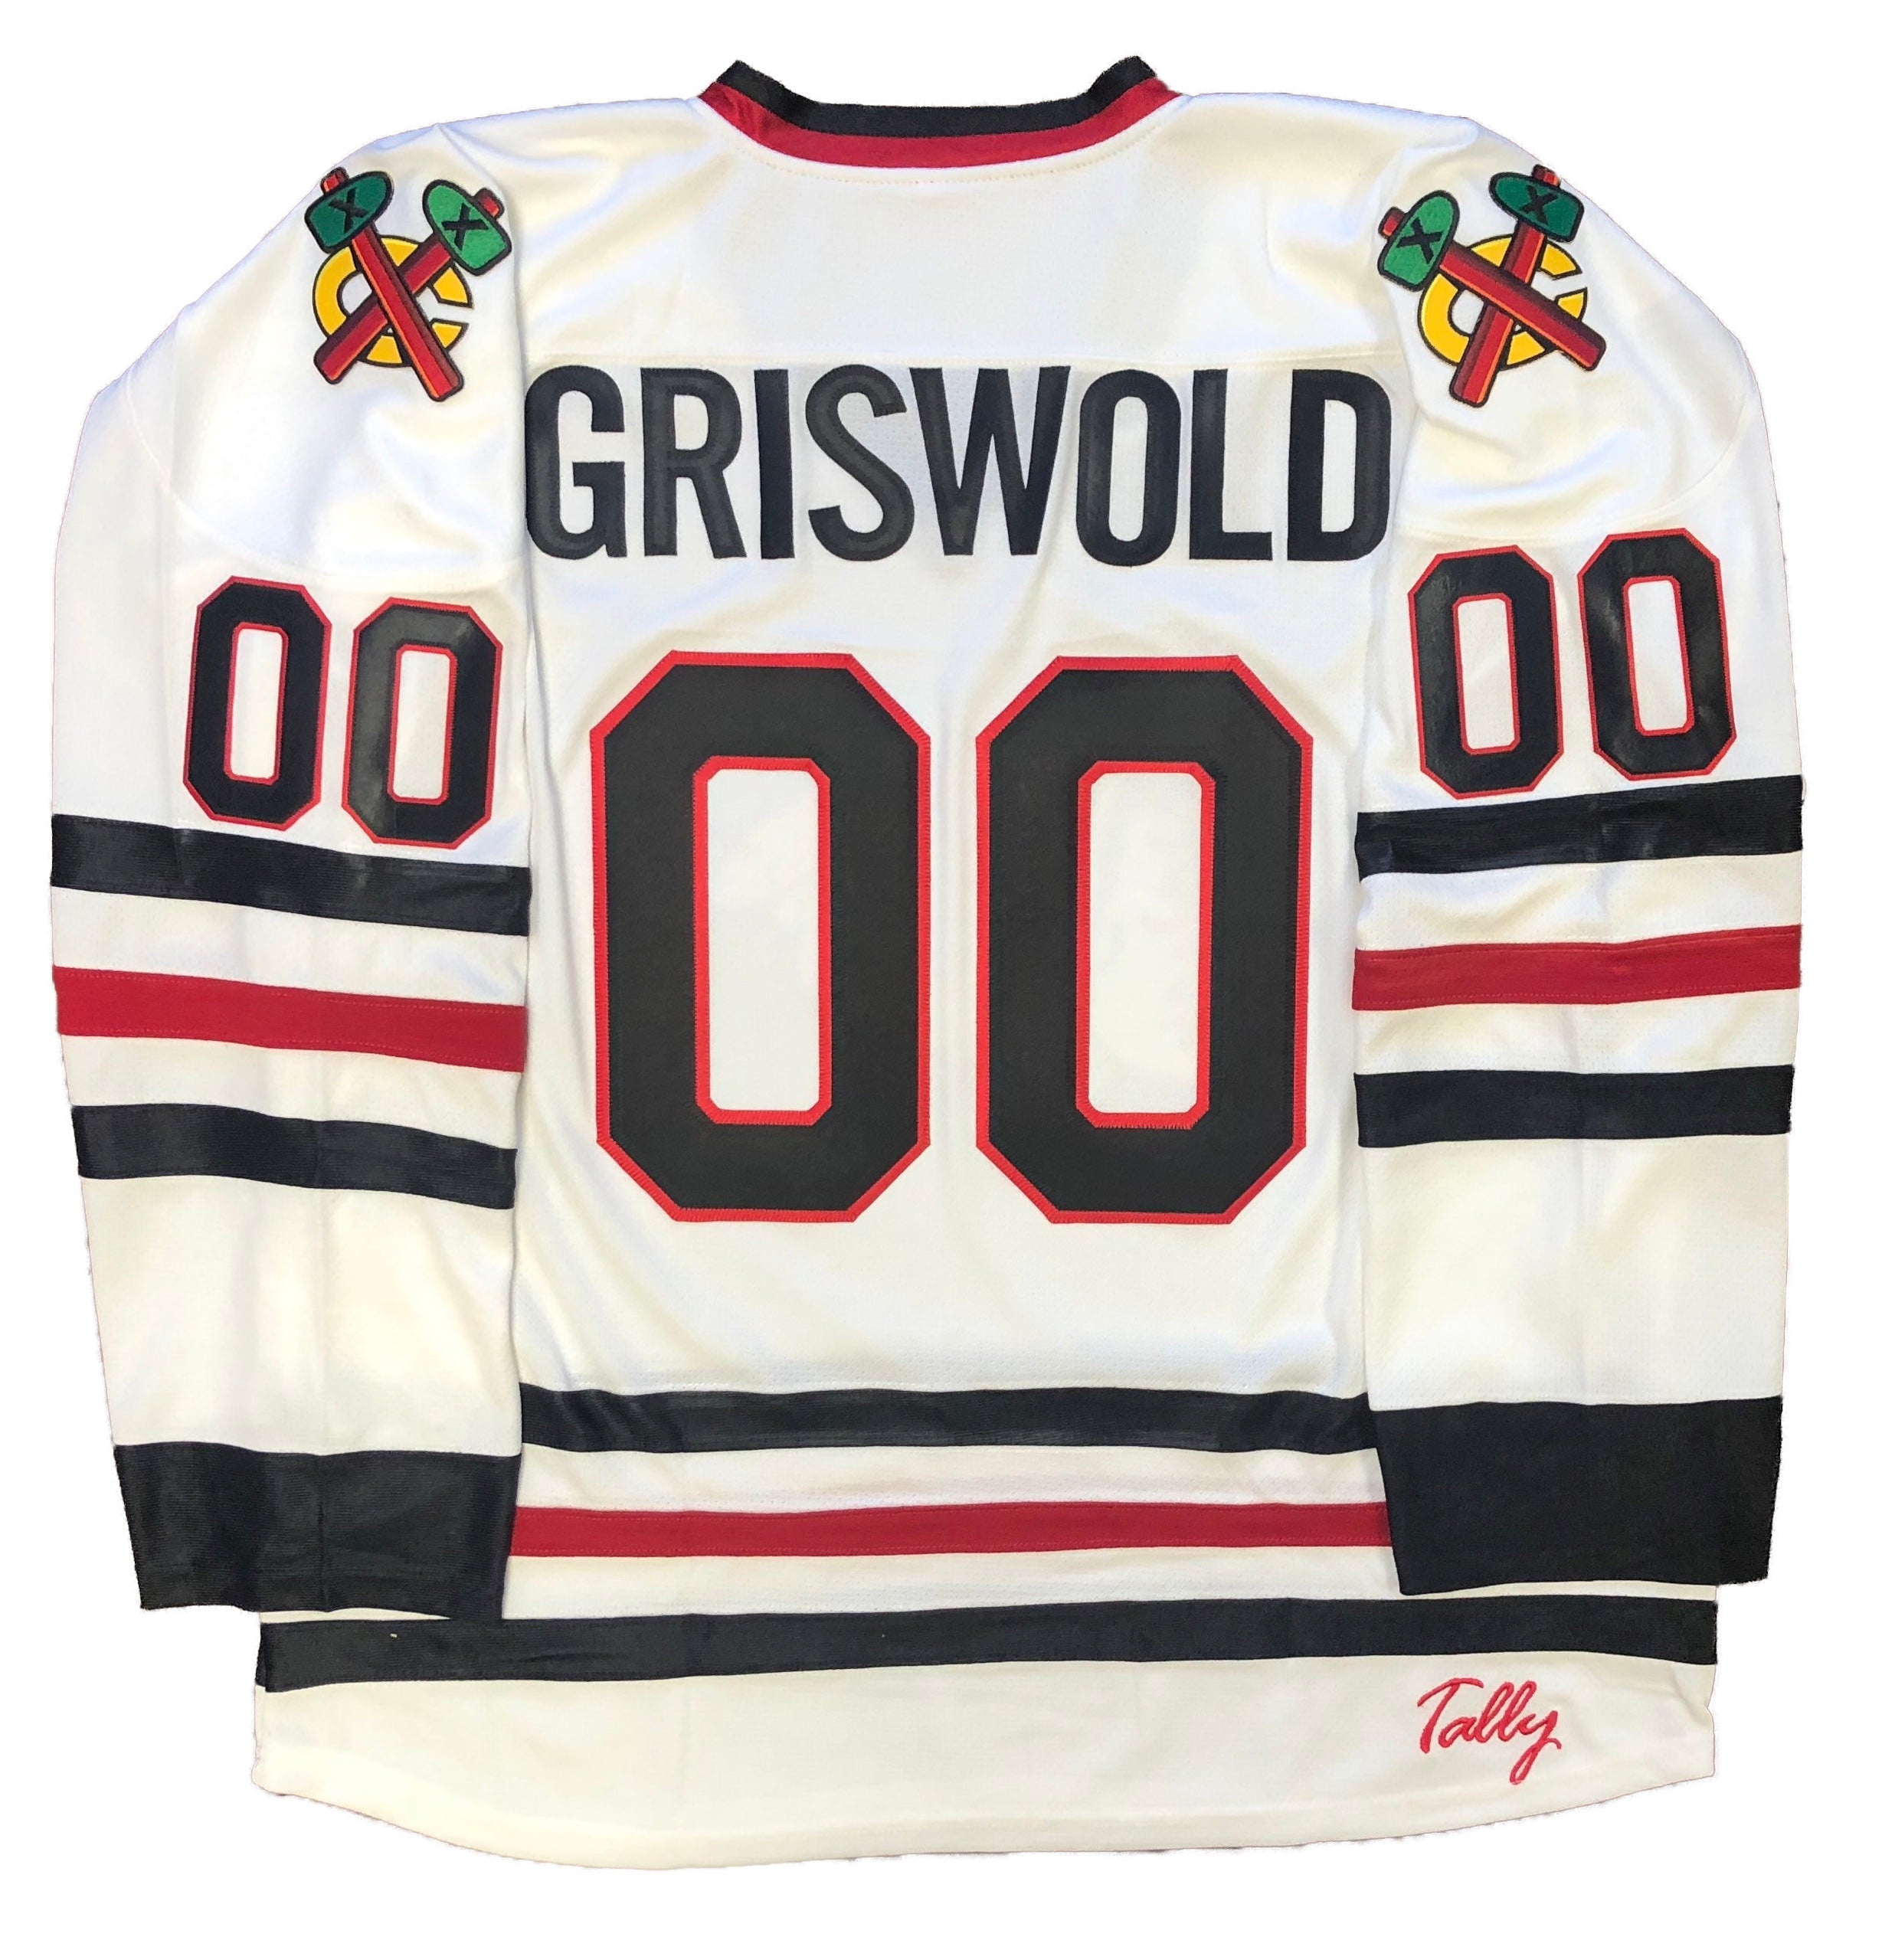  GHOSTWEAR Griswold #00 Movie Hockey Jerseys Stitched Letters  and Numbers : Clothing, Shoes & Jewelry